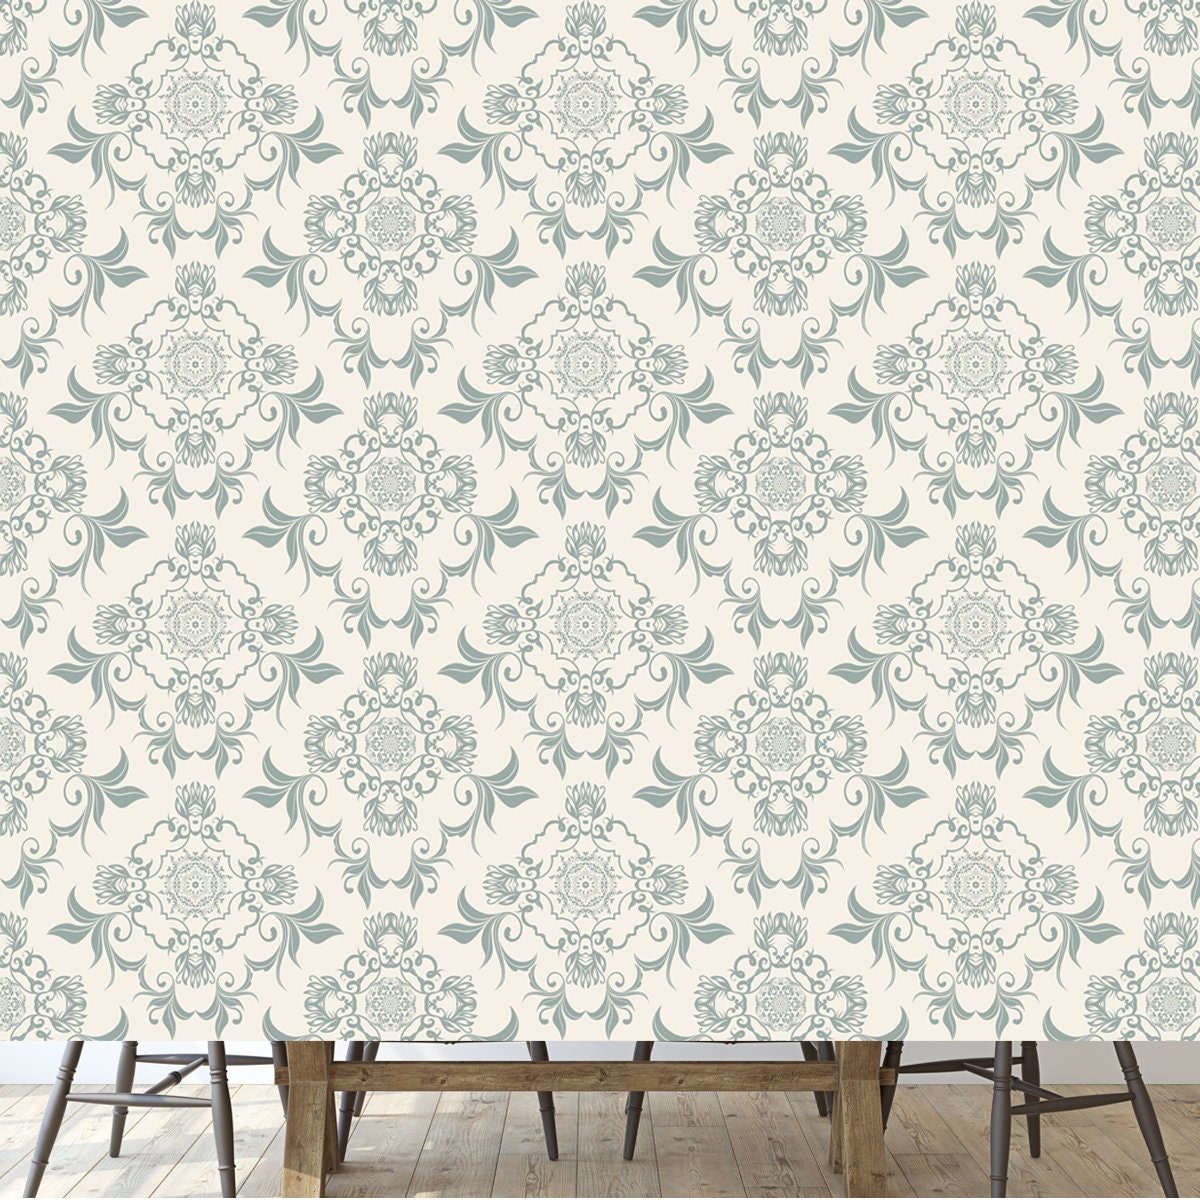 Grey Floral Ornament on Background Wallpaper Dining Room Mural